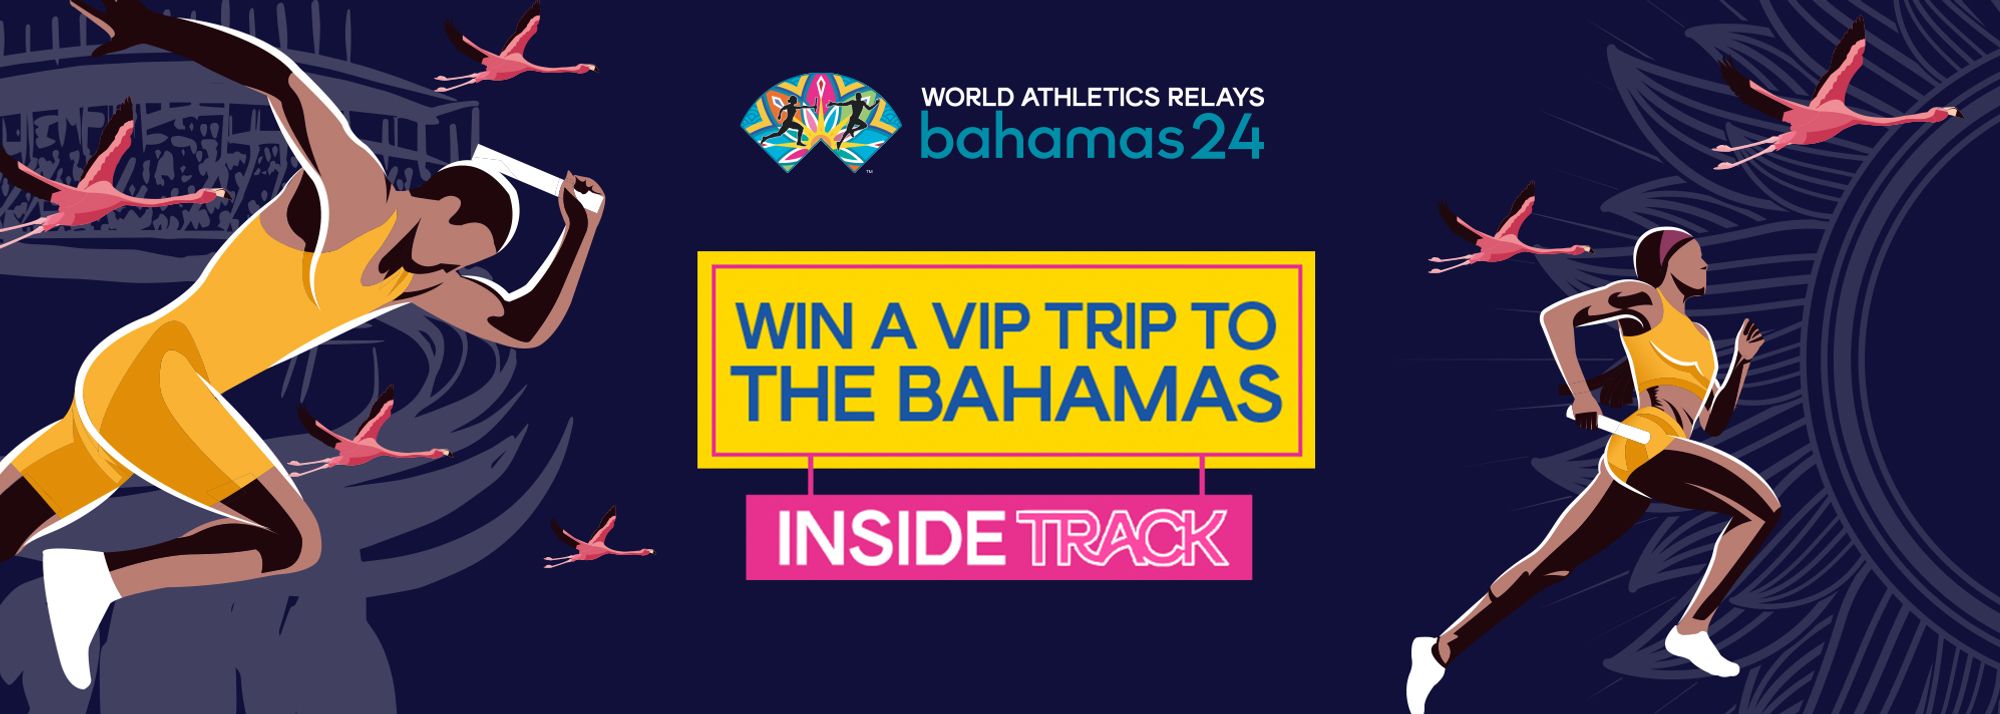 Win a trip for two, with flights and accommodation, to The Bahamas to attend the World Relays.